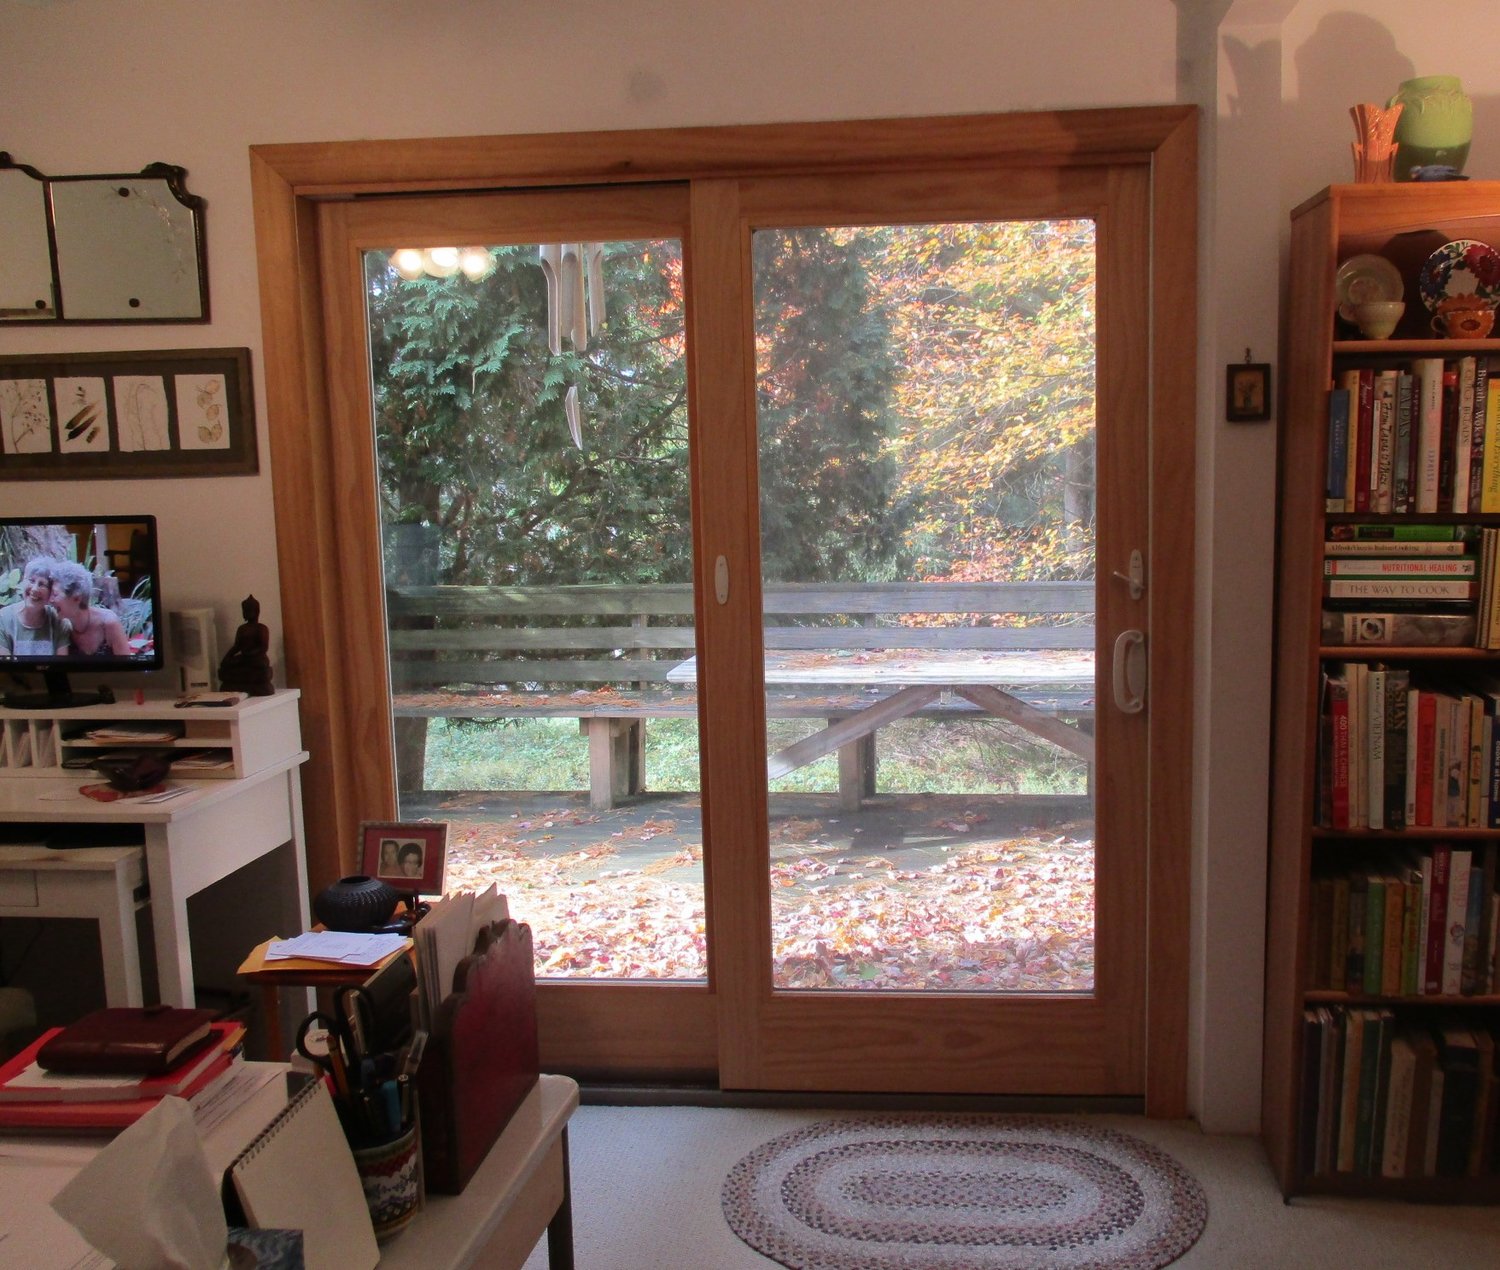 The glass door leading to the back porch.